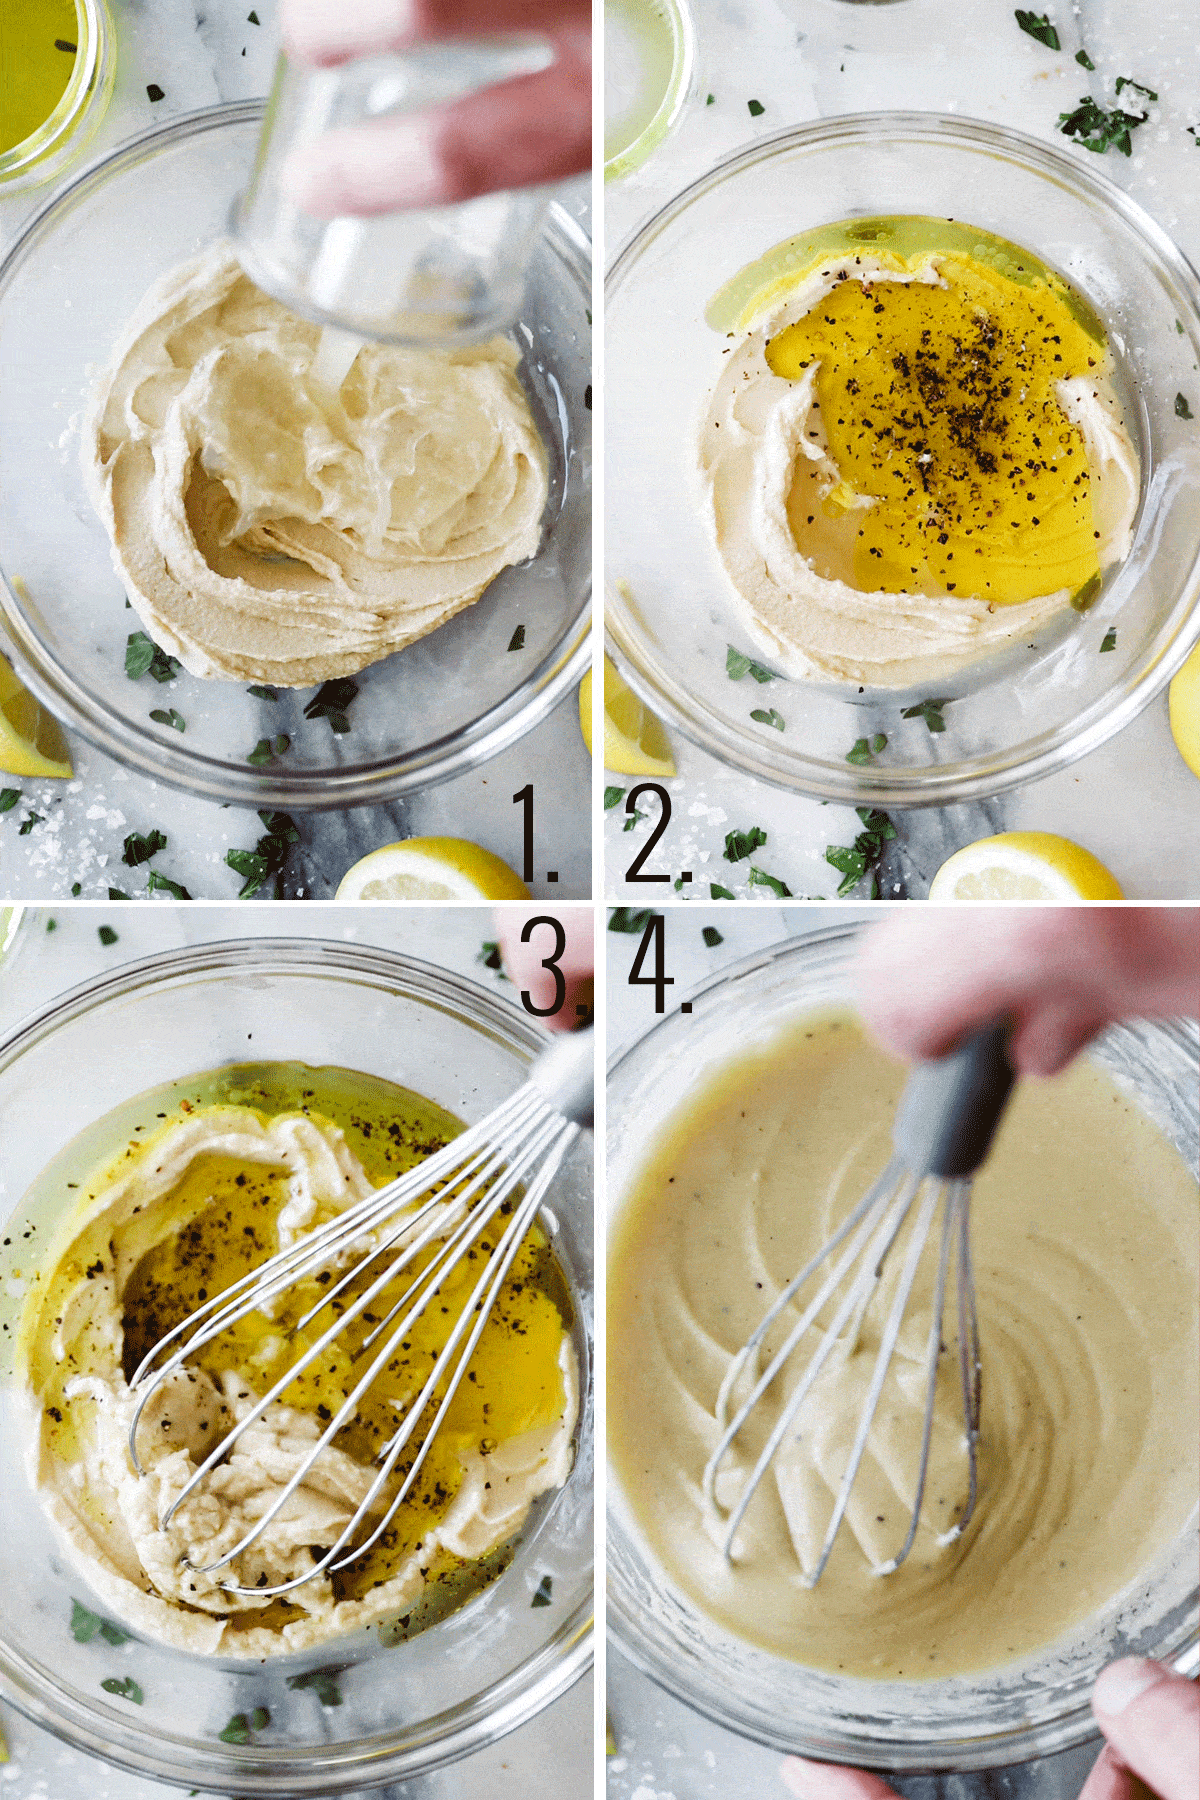 Hummus, lemon juice, olive oil and seasoning added to a bowl and whisked together. 